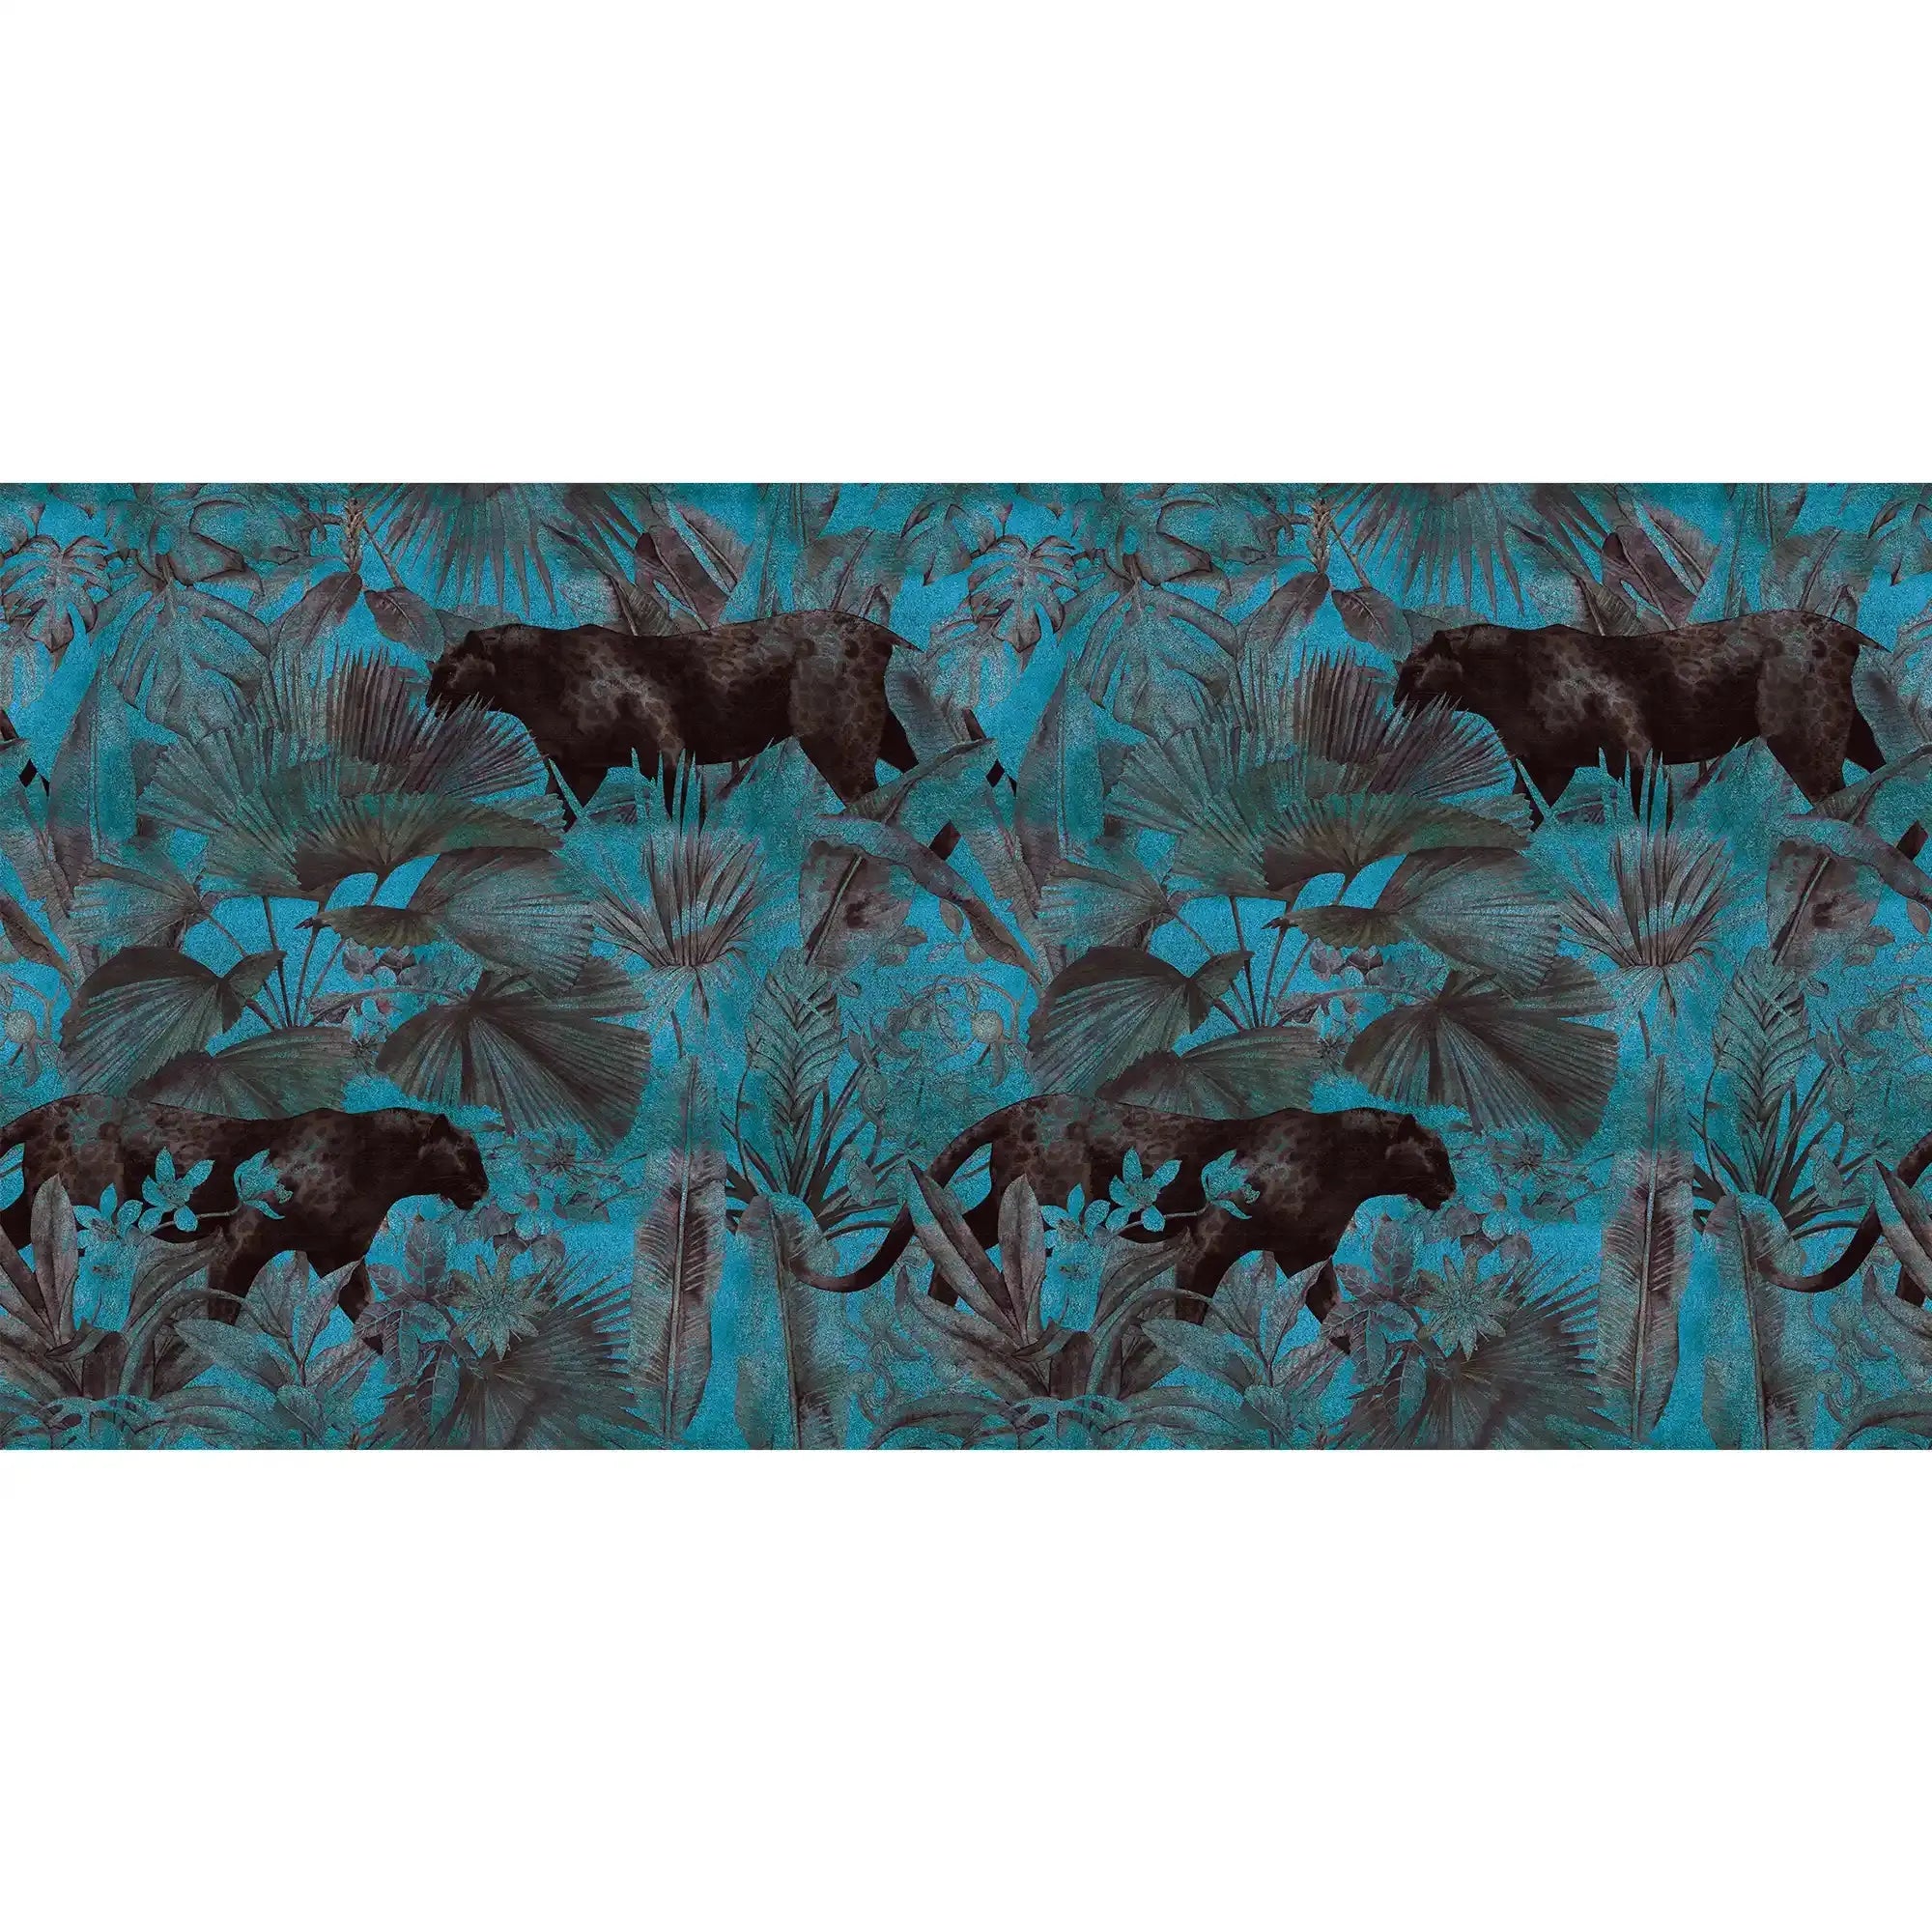 3076-D / Botanical Wallpaper with Panther Theme: Adhesive Mural for Wall Accent - Artevella